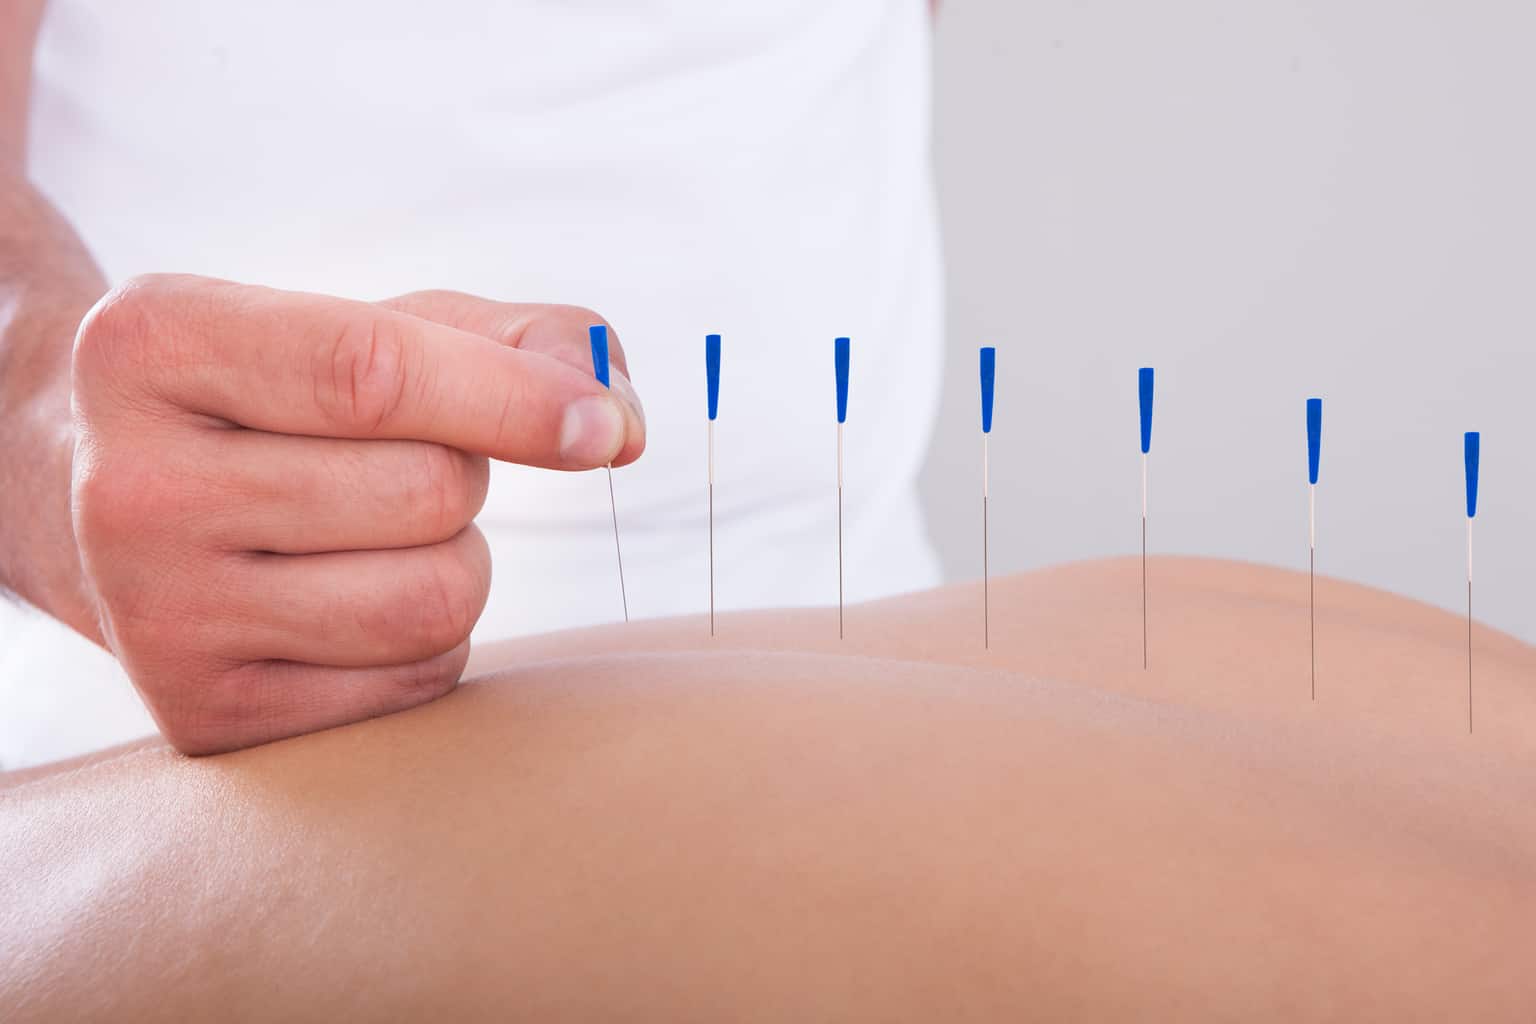 Can acupuncture really reduce nerve pain and inflammation?